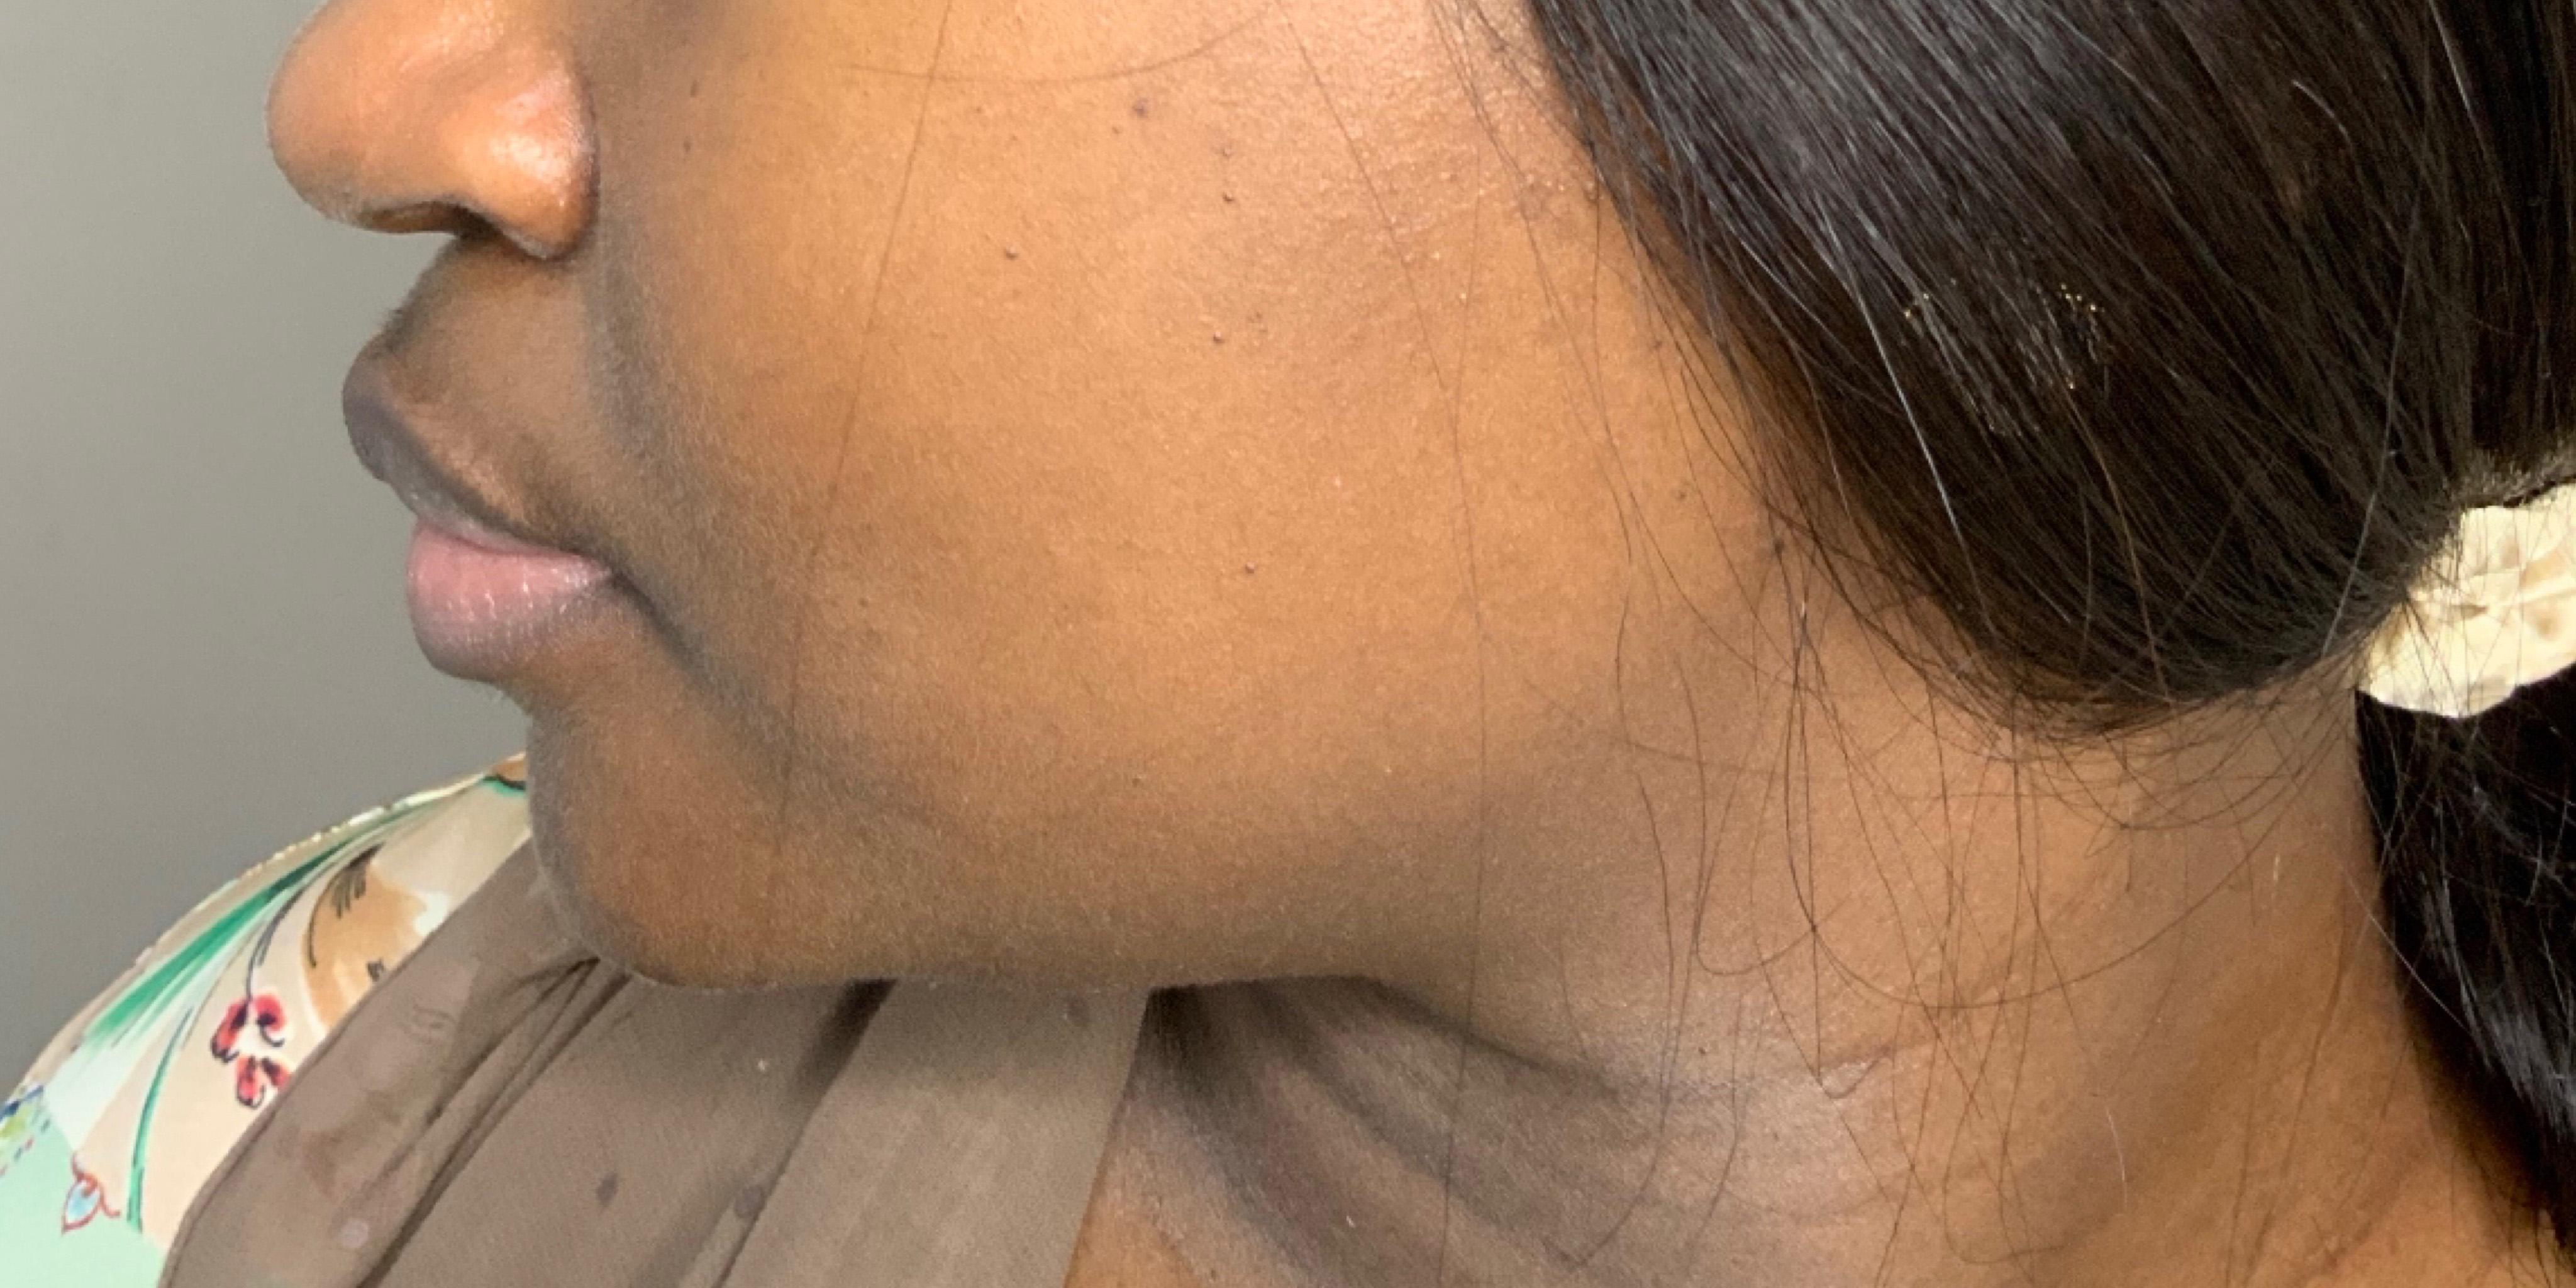 Chin Augmentation And Kybella Before and After | Flawless Skin